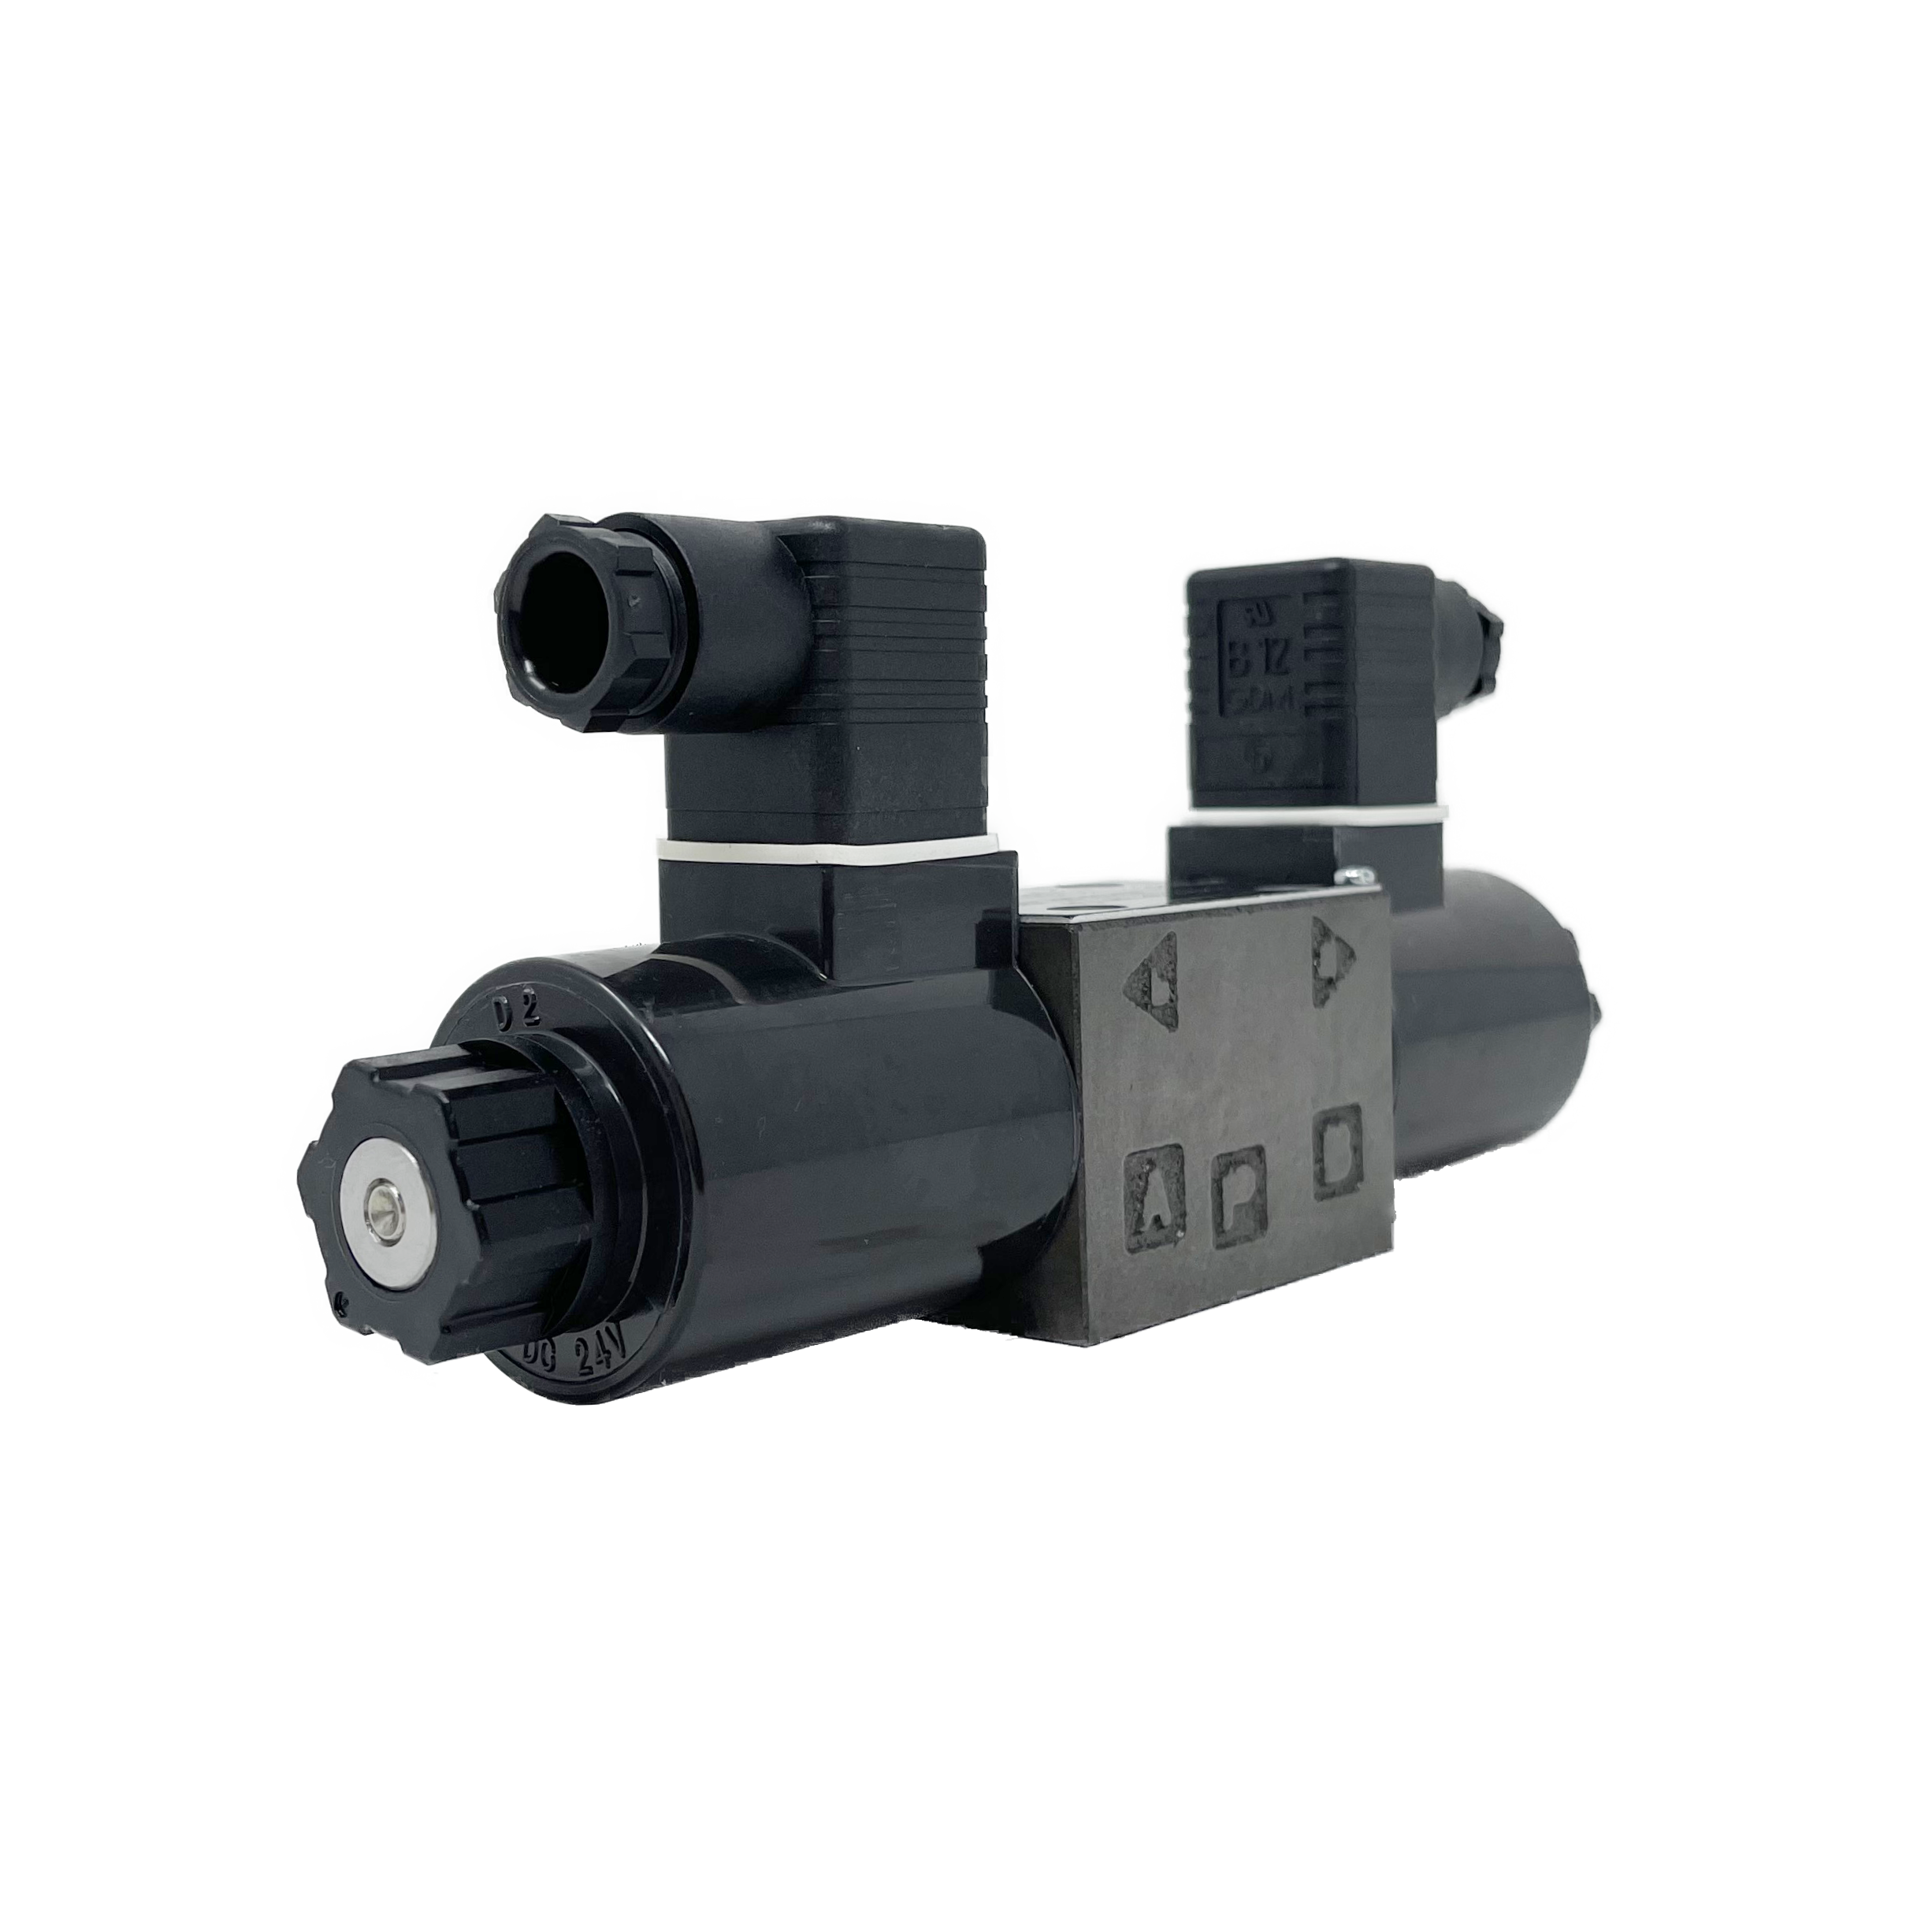 SA-G01-C7Y-D2-E31 : Nachi Solenoid Valve, 3P4W, D03 (NG6), 13.2GPM, 5075psi, P to T with A & B Blocked in Neutral, 24 VDC, DIN